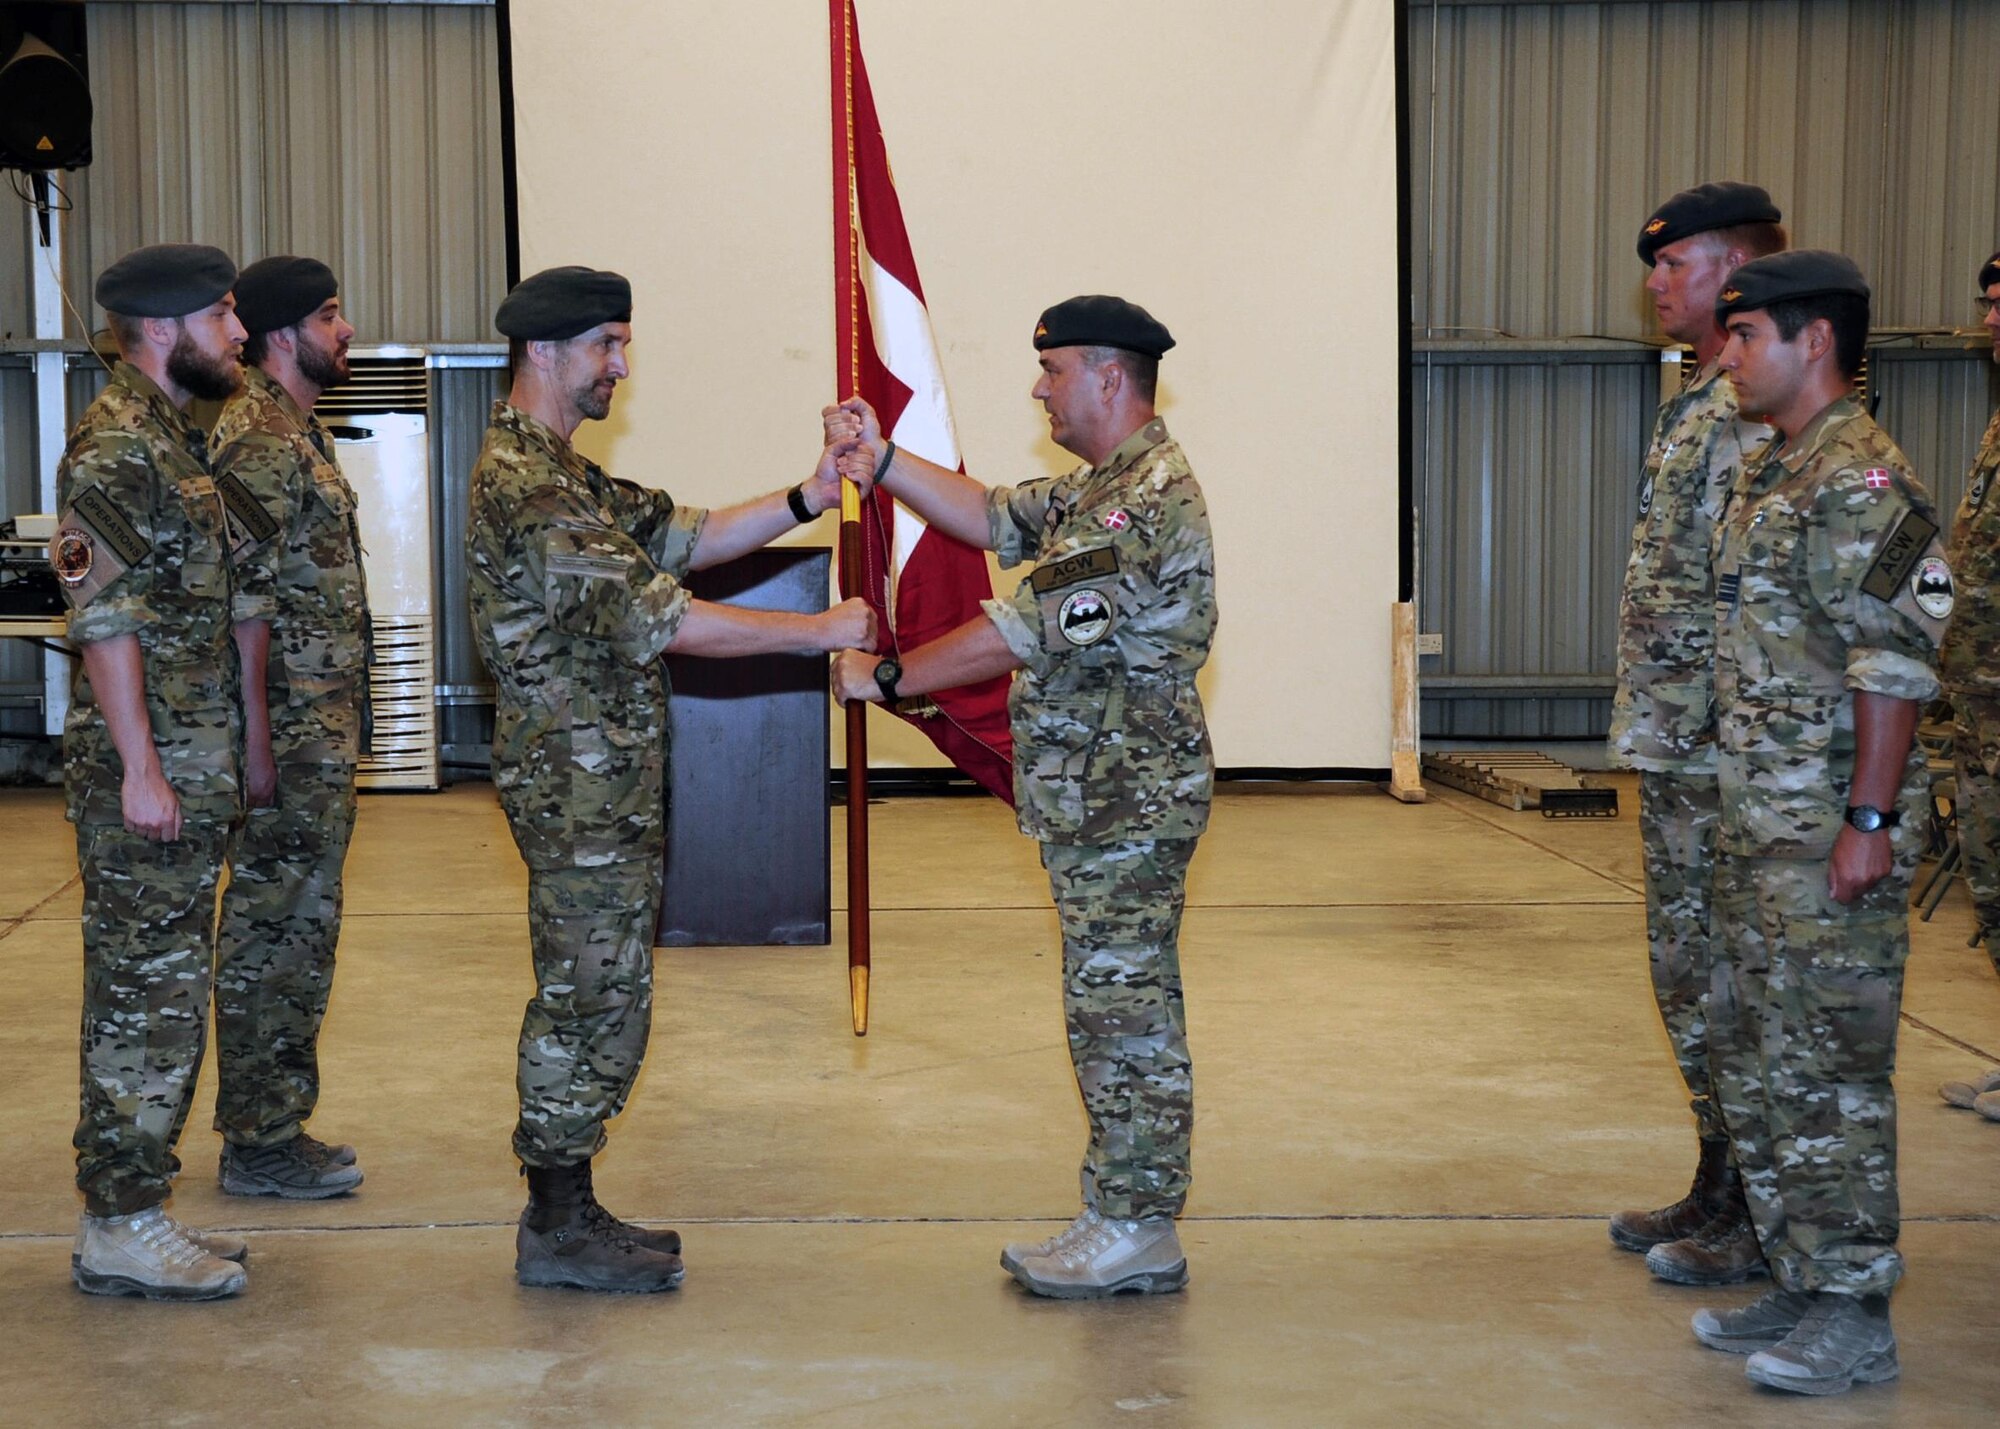 Royal Danish Air Force Lt. Col. John Pedersen, right, Team 7 Detachment commander, passes the Dannebrog, national flag of Denmark, to Royal Danish Air Force Lt. Col. Claus Pedersen, left, Team 8 Detachment commander, during a change of command ceremony June 29, 2017, at an undisclosed location in southwest Asia. As Coalition partners of the 380th Air Expeditionary Wing, both Team 7 and Team 8 members serve as integrated colleagues of the 727th Expeditionary Air Control Squadron. (U.S. Air Force Photo by Senior Airman Preston Webb)